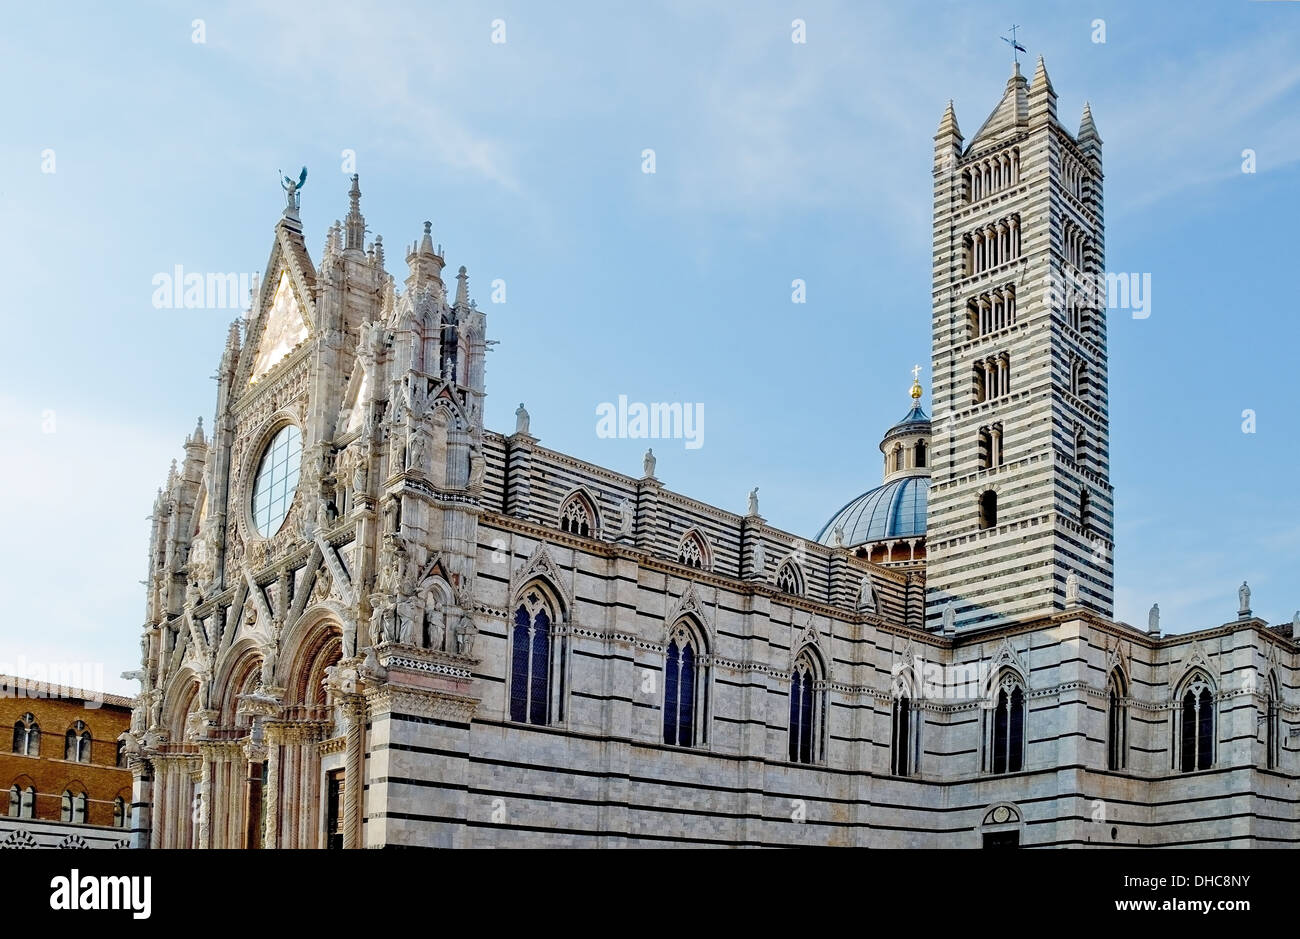 The facade and belfry of the Siena Cathedral in Opera della metropolitana. Siena, Italy Stock Photo